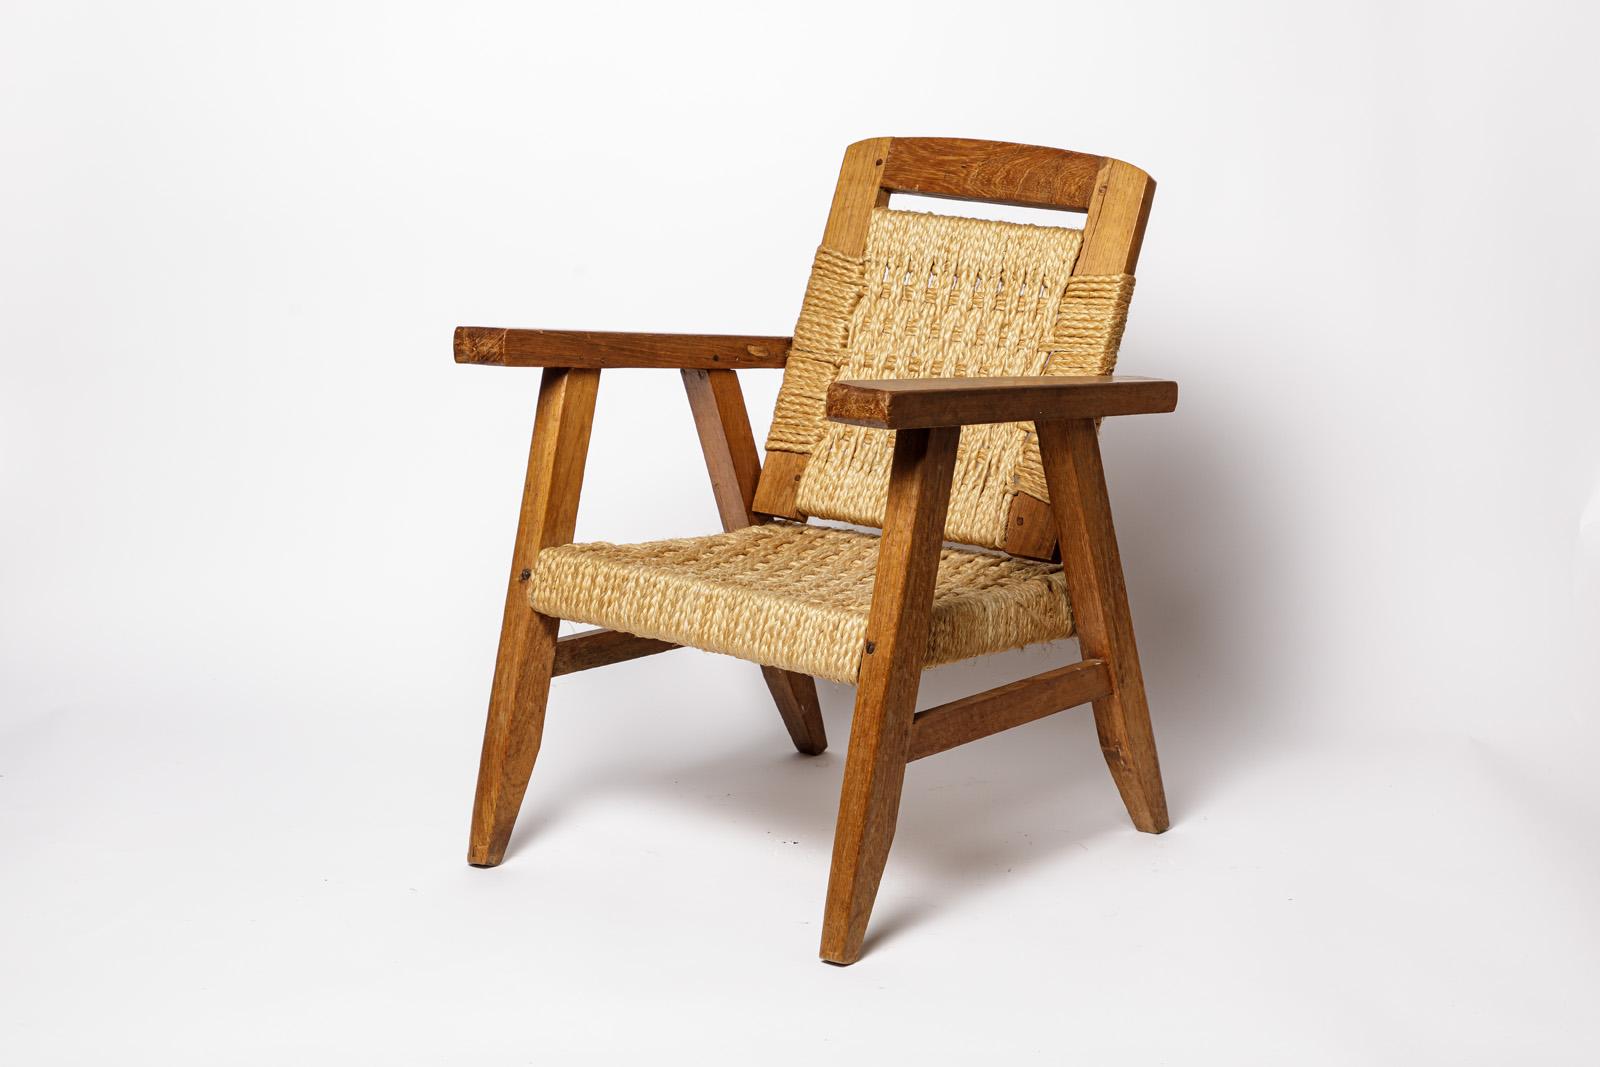 attributed to Audoux Minnet 1/2

20th century design lounge chair for children

Wood and cord design

circa 1970

Original good condition

Height 48 cm
Large 37 cm
Depth 40 cm

Seat height 23 cm